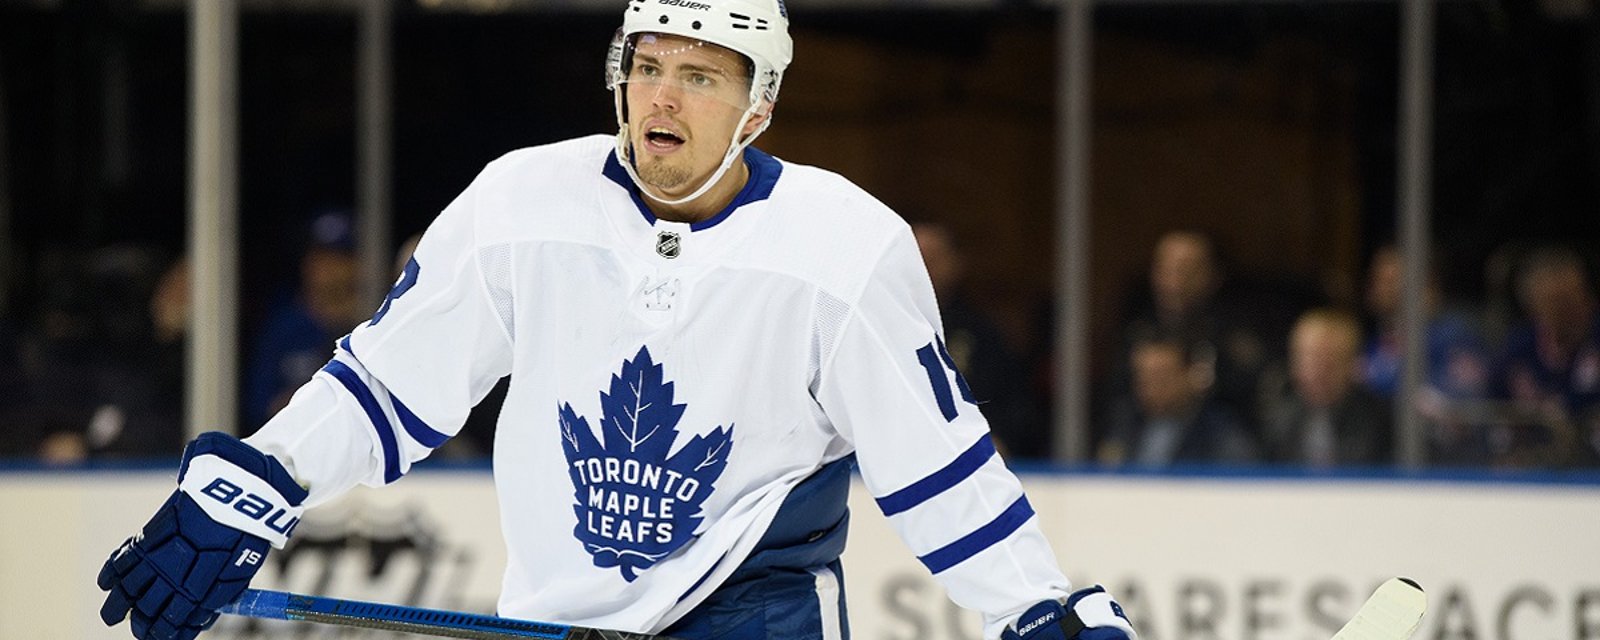 Maple Leafs cut their roster down to 30.